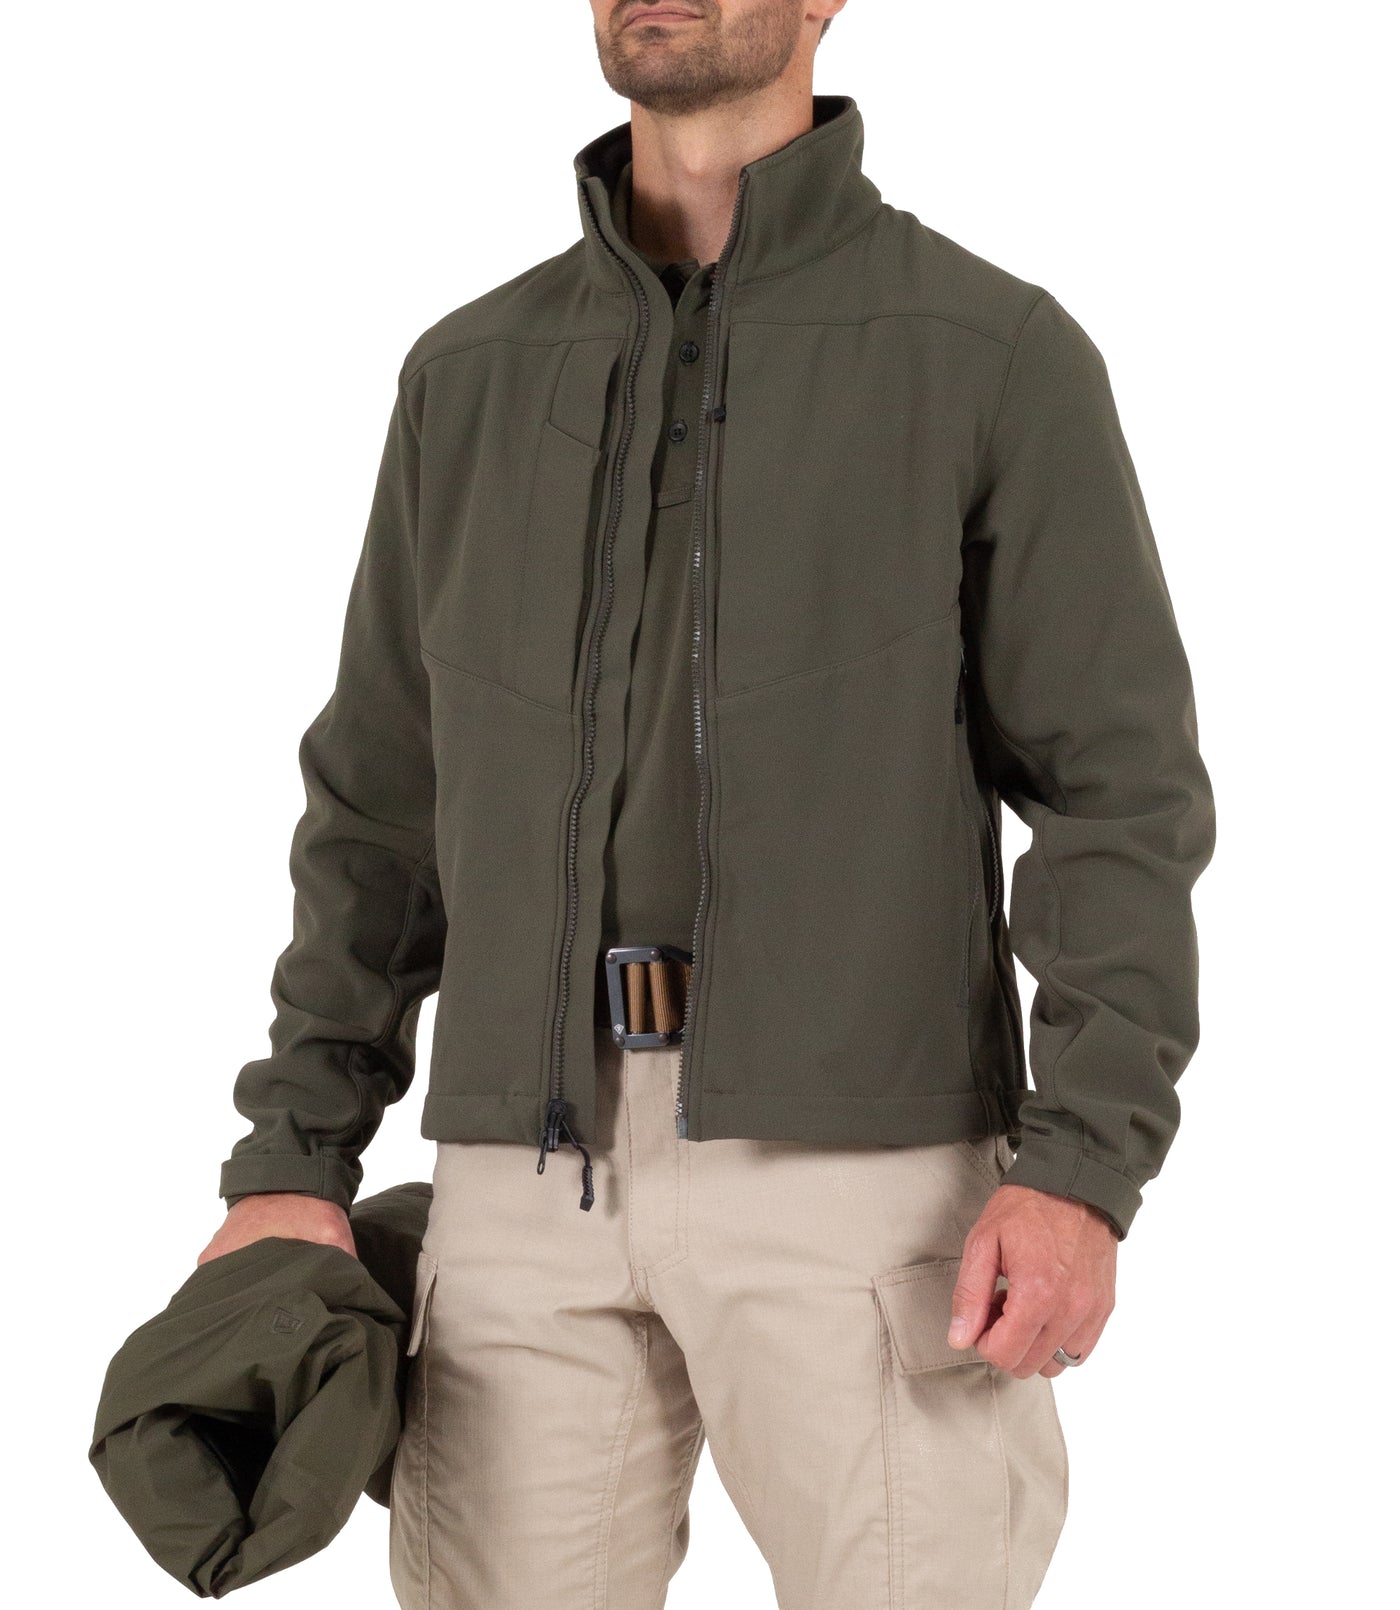 Softshell Jacket for Men’s Tactix System Jacket in OD Green